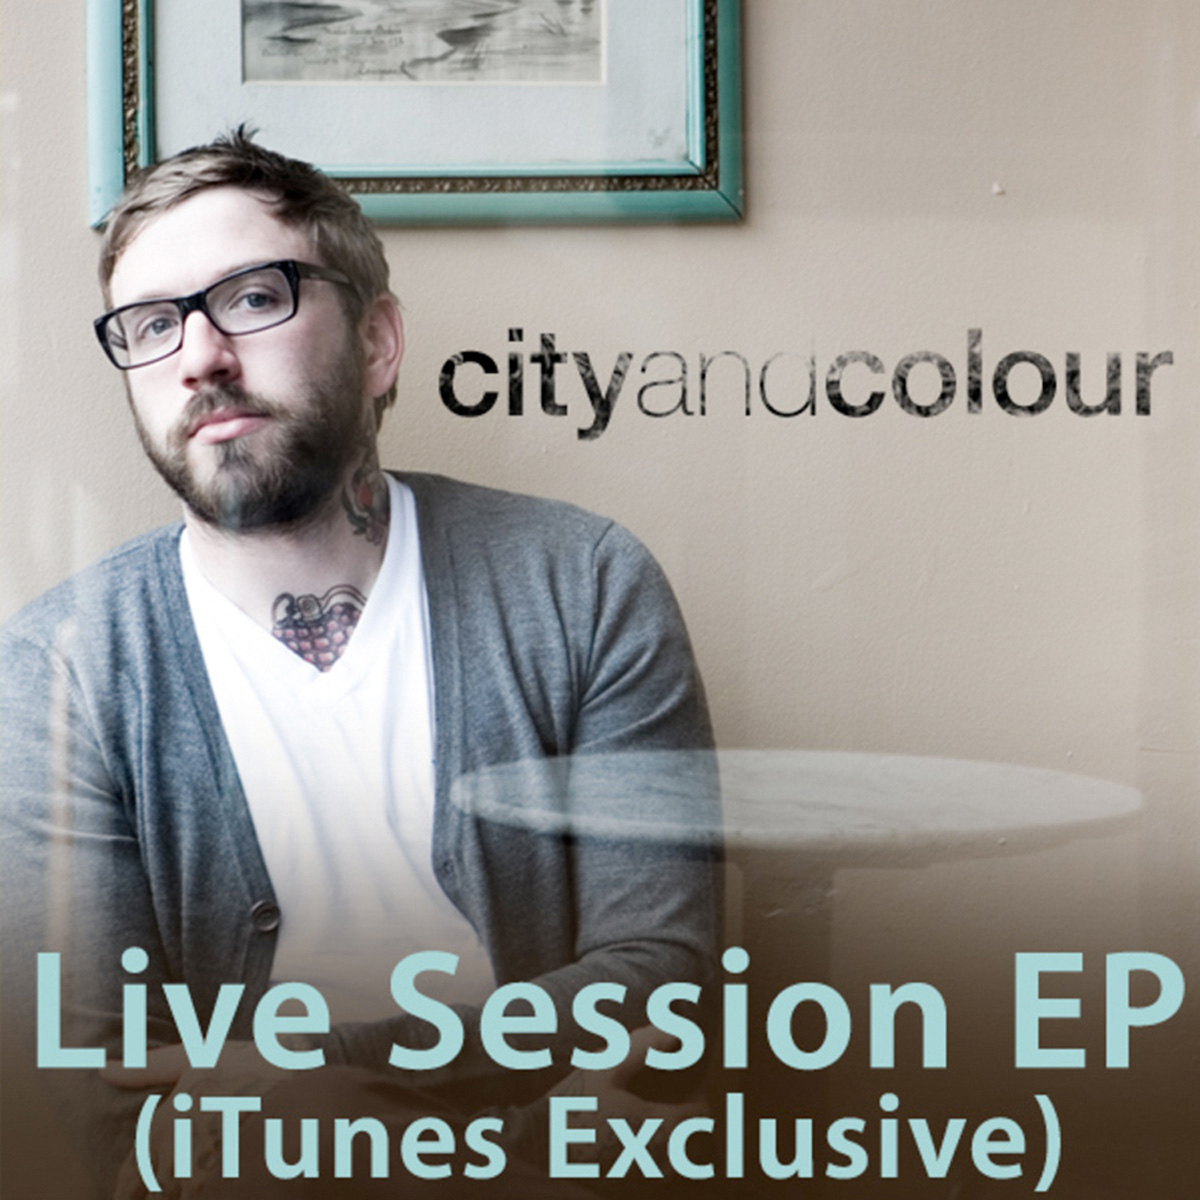 Discographie - City And Colour - Dallas Green - iTunes Live Session EP